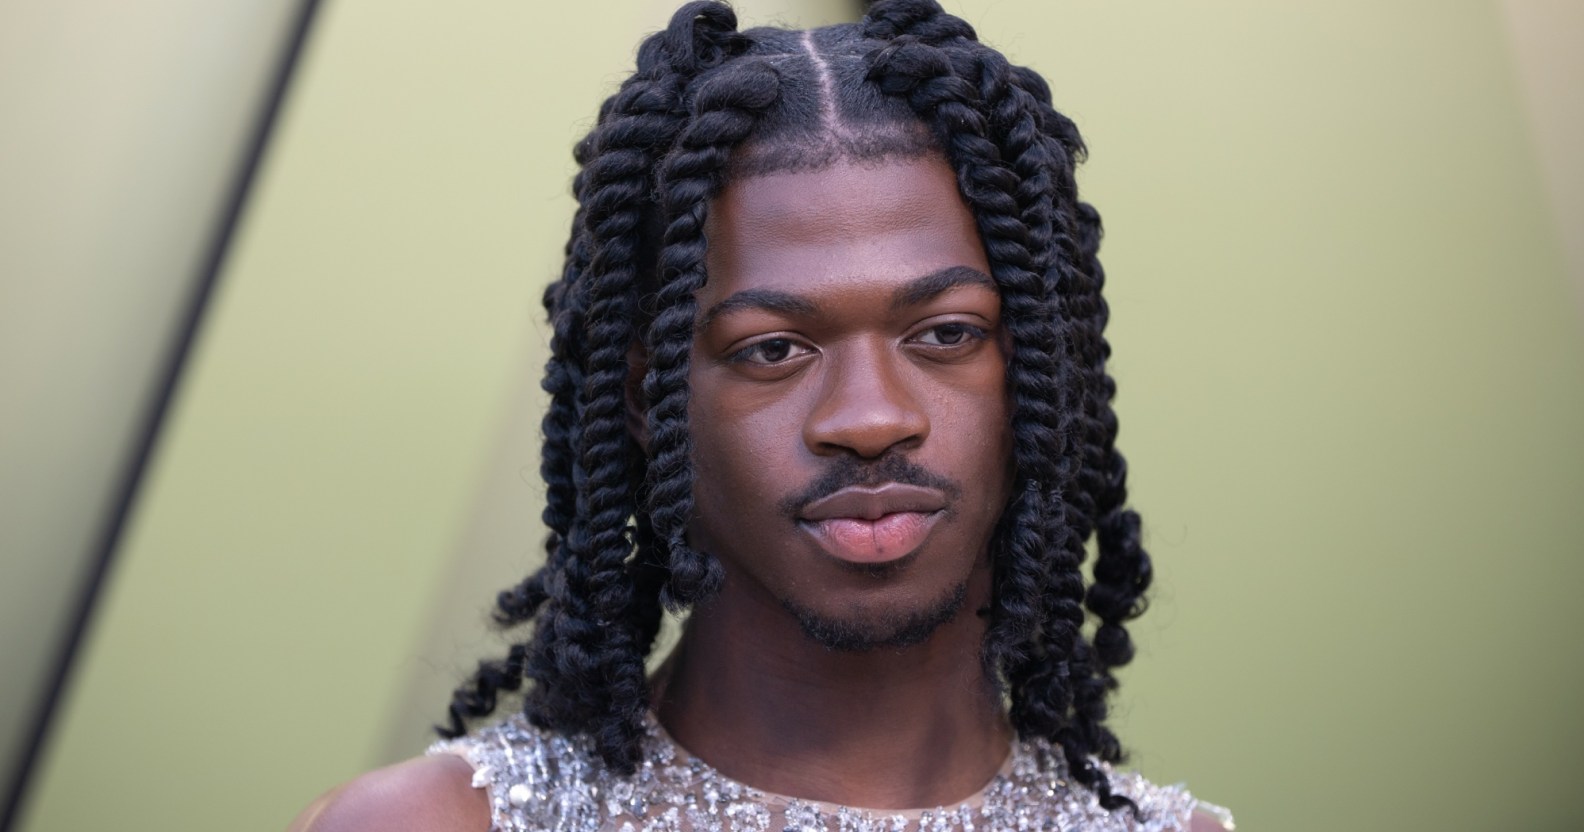 Lil Nas X has caused divide after apologising to the trans community.